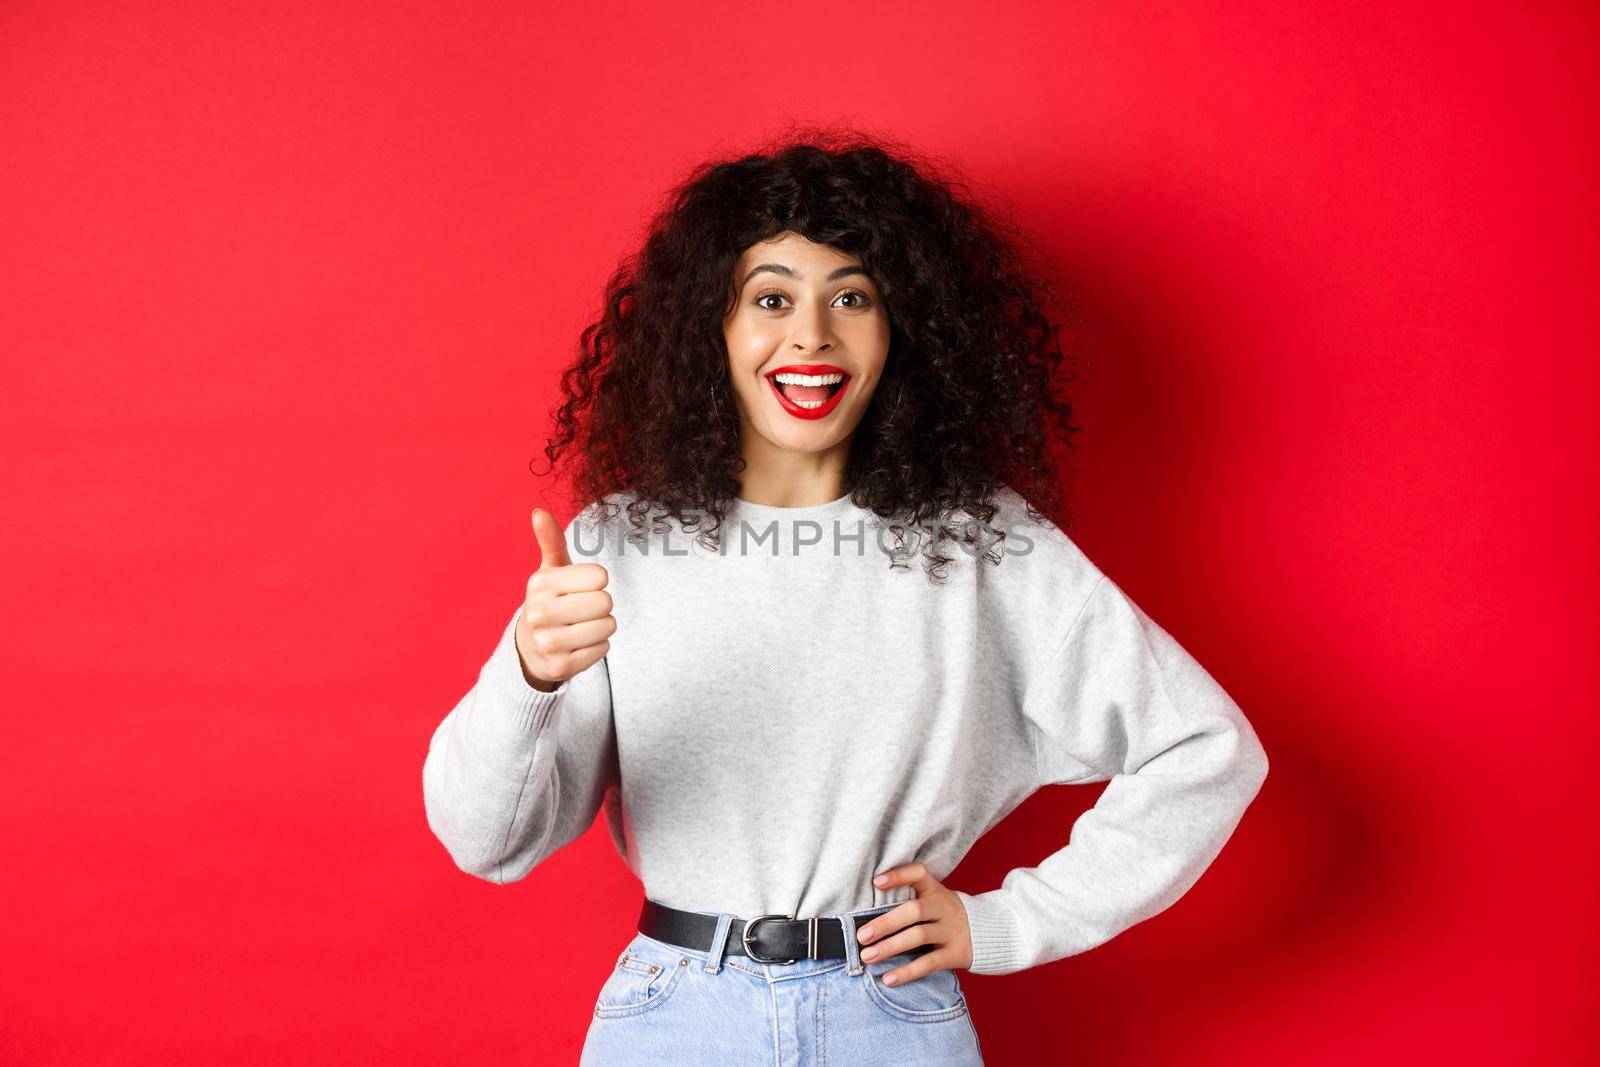 Happy young woman with curly hair praising good work, say well done and show thumb up gesture, approve and praise you, standing on red background.